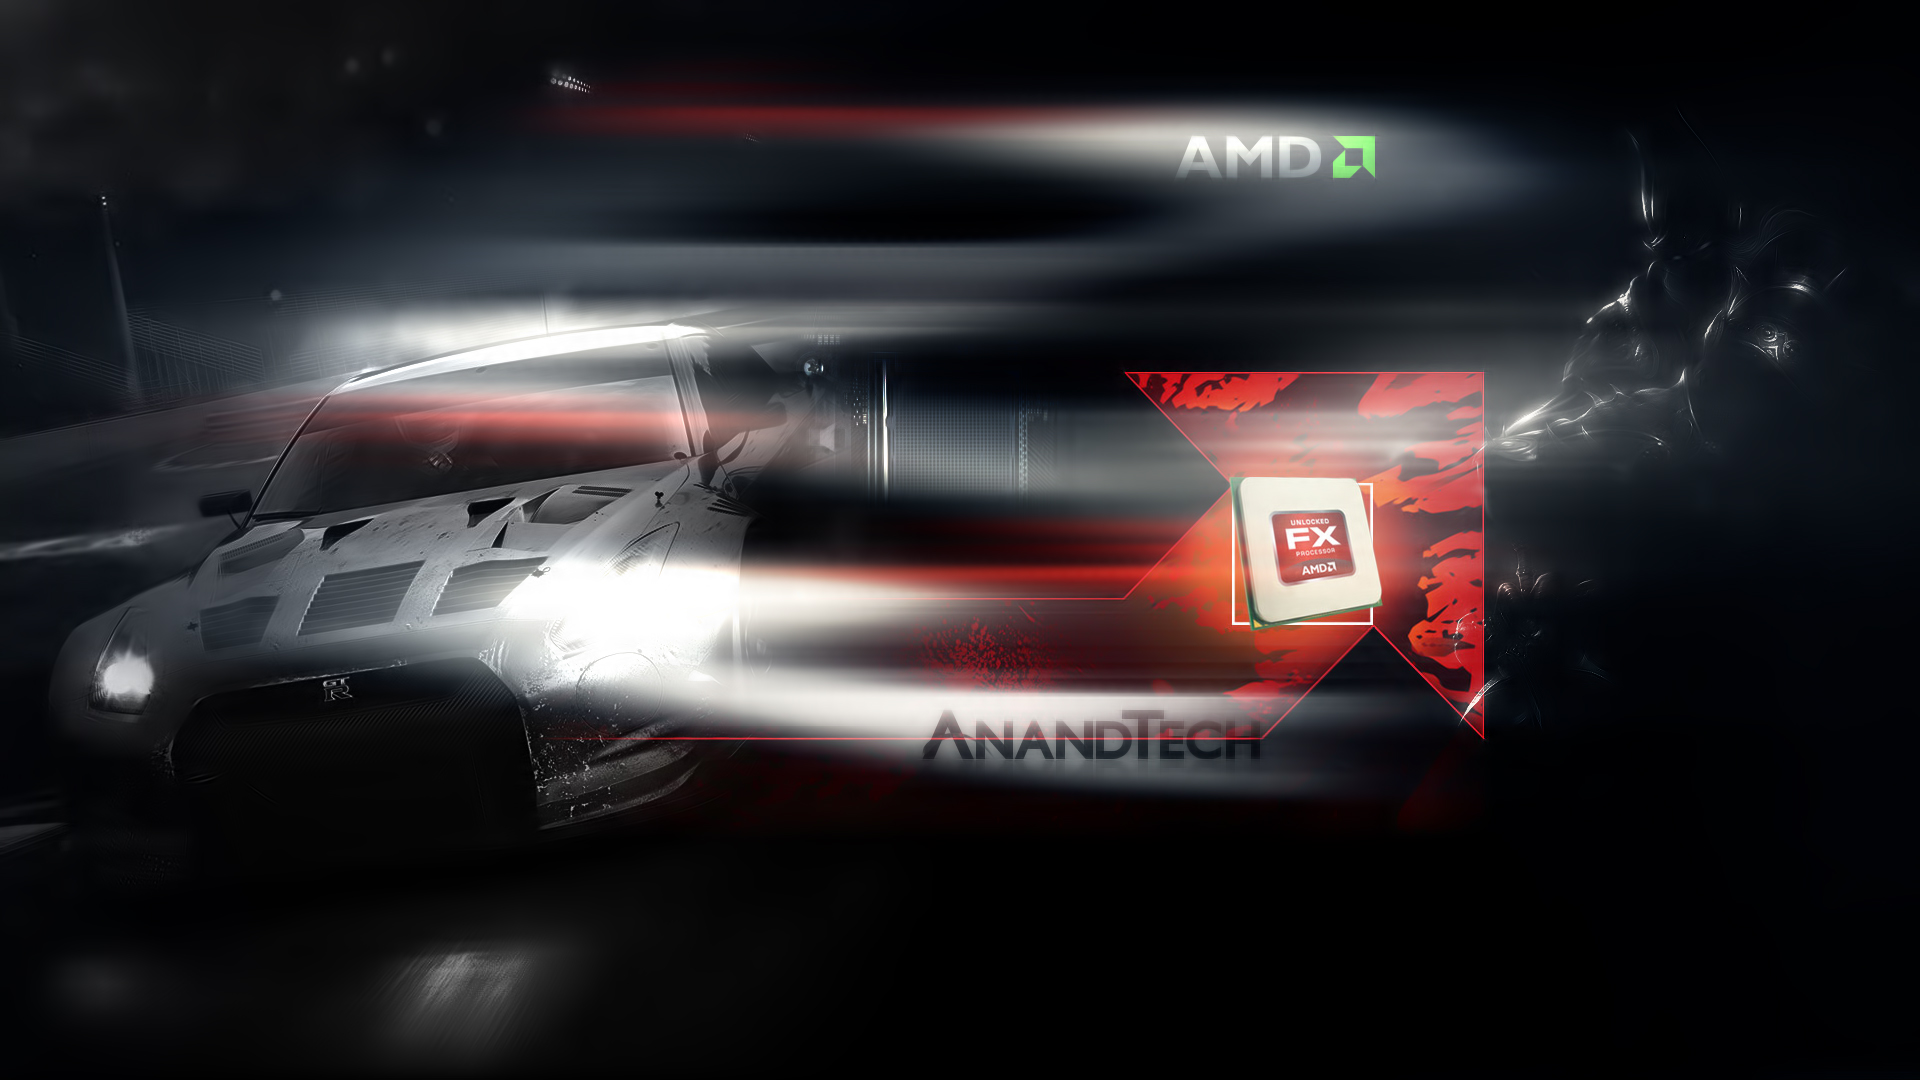 Amd Fx Anandtech Forums For Mobile Devices HD With Resolutions